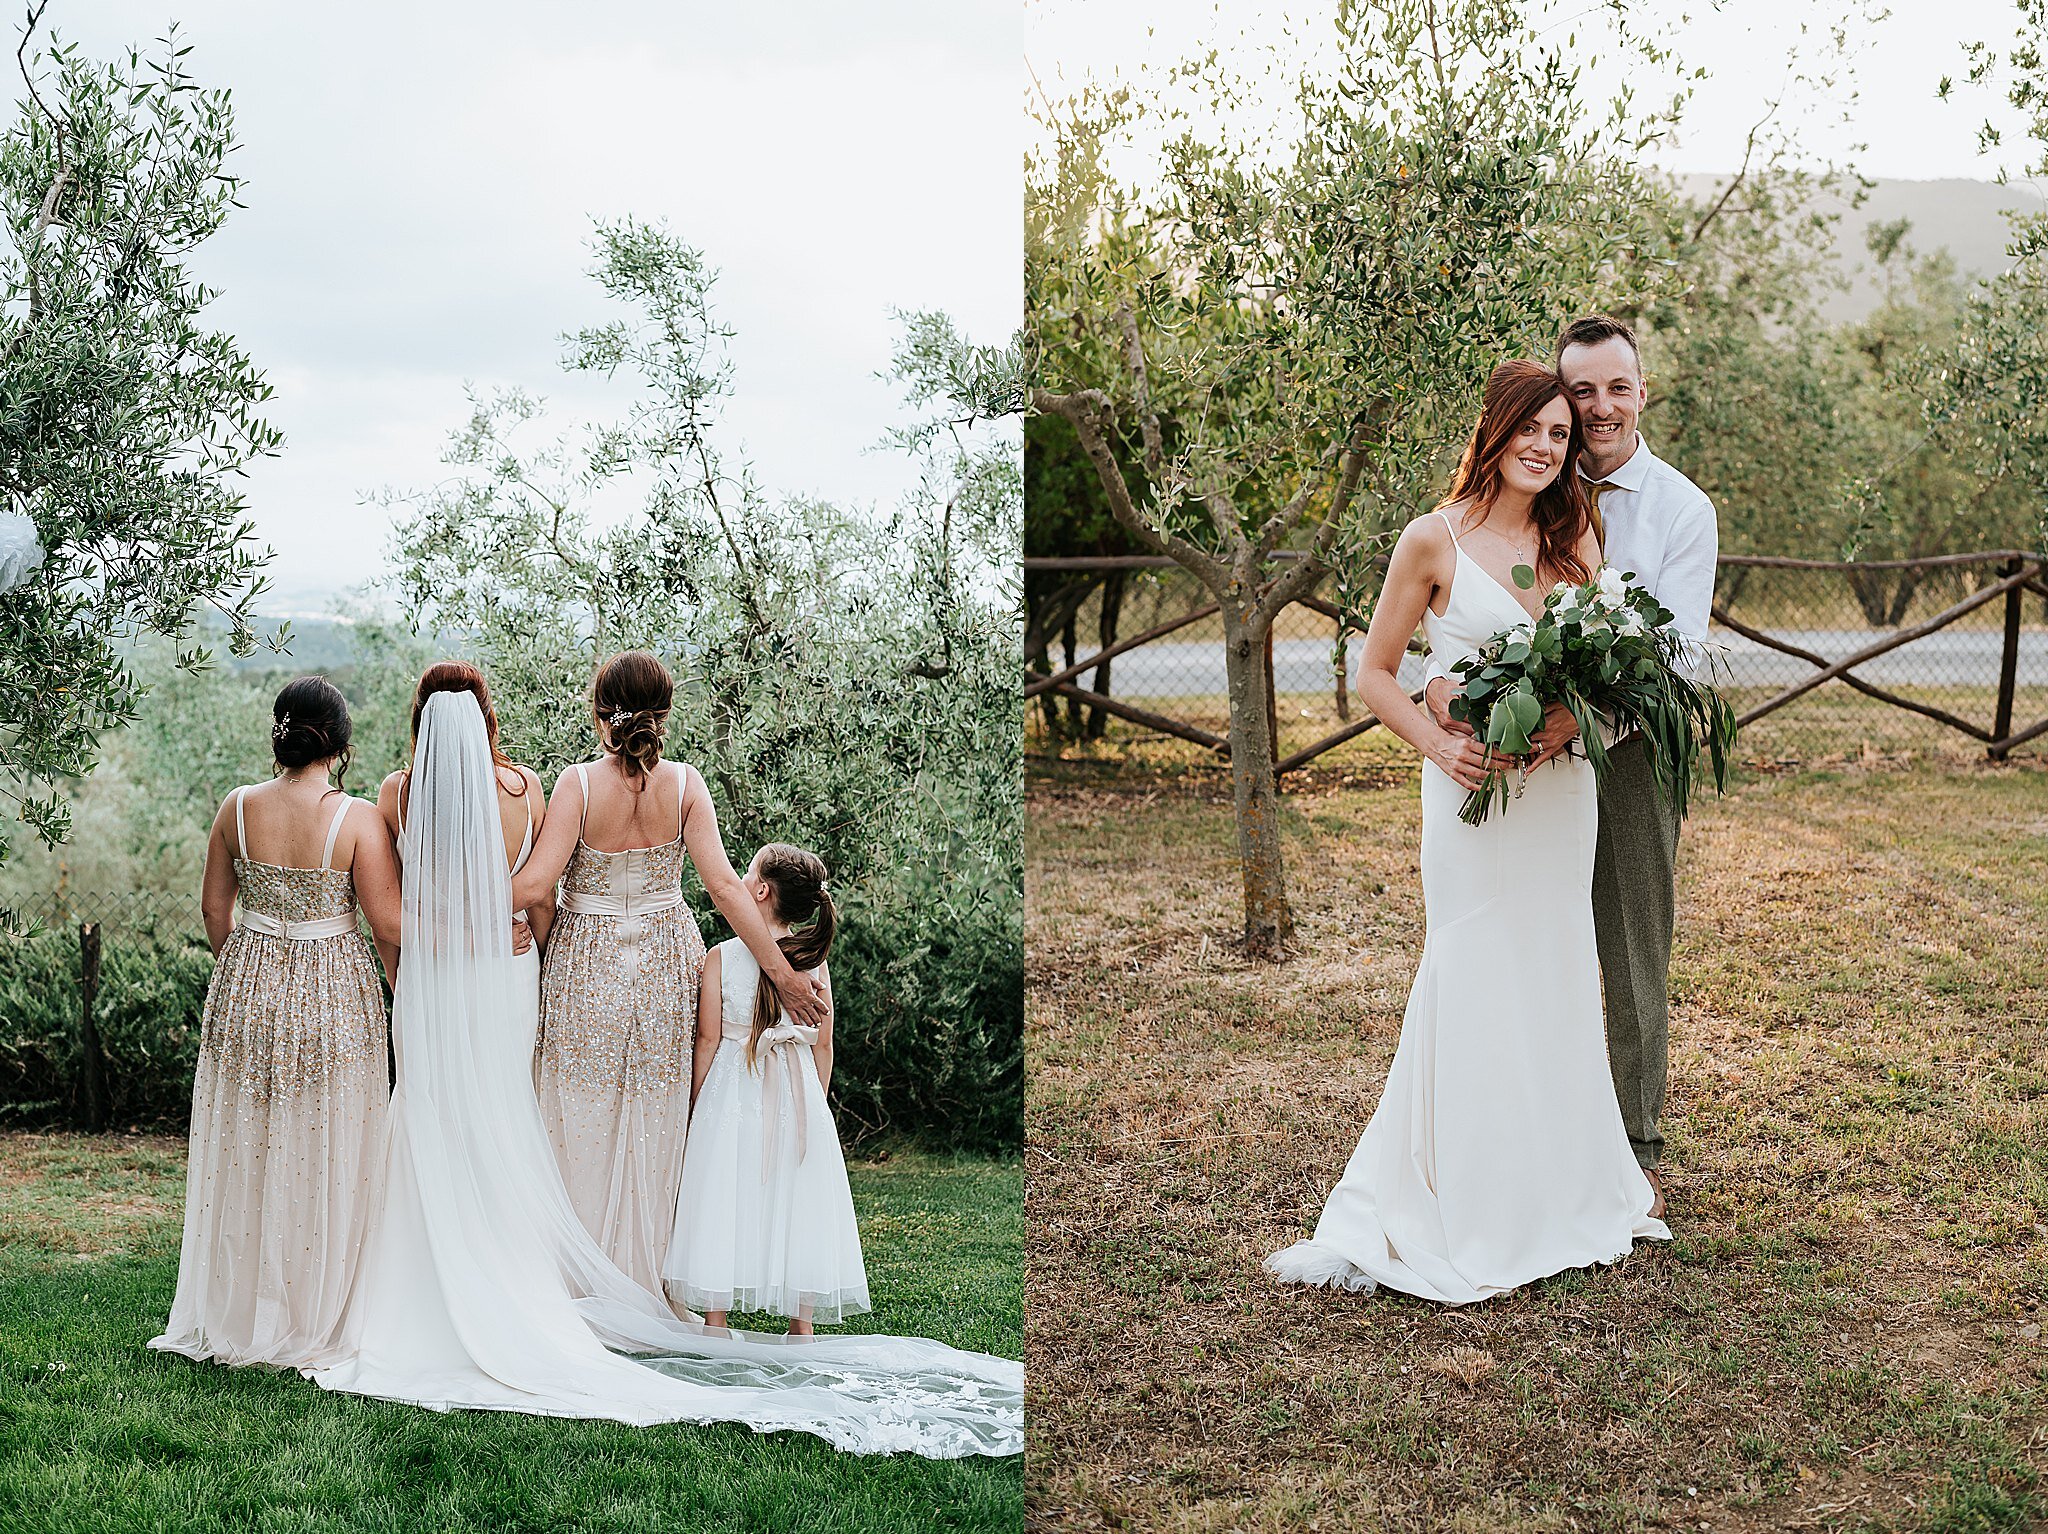 relaxed wedding photographer in tuscany